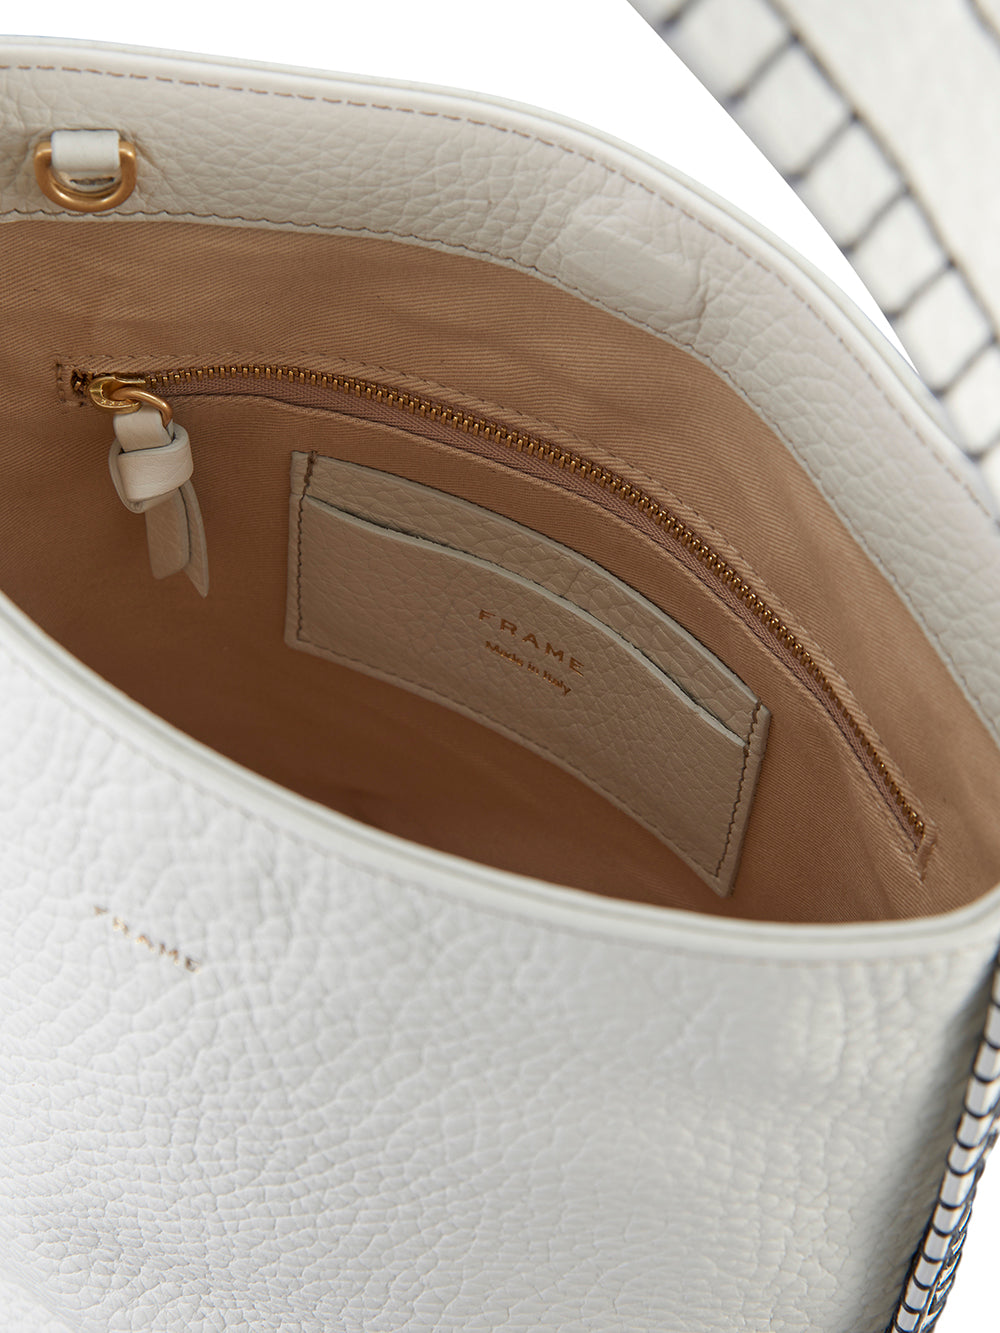 TL Soft Quilted Leather Bucket Bag - L'Atelier Global Cognac